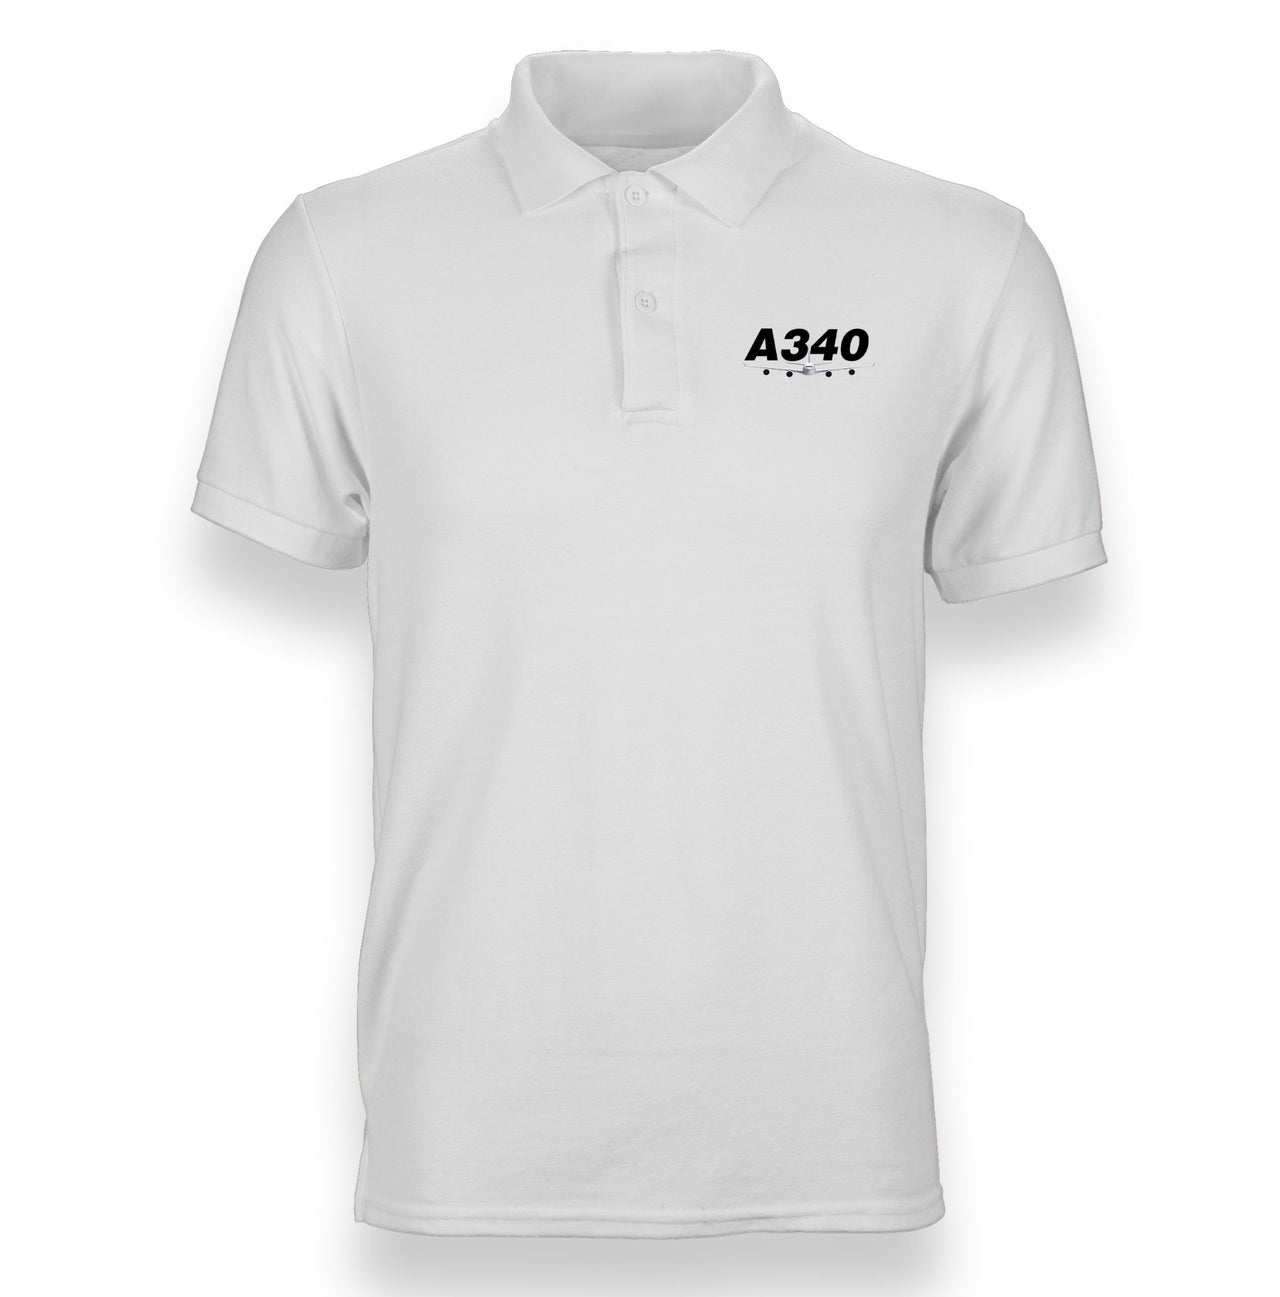 Super Airbus A340 Designed "WOMEN" Polo T-Shirts